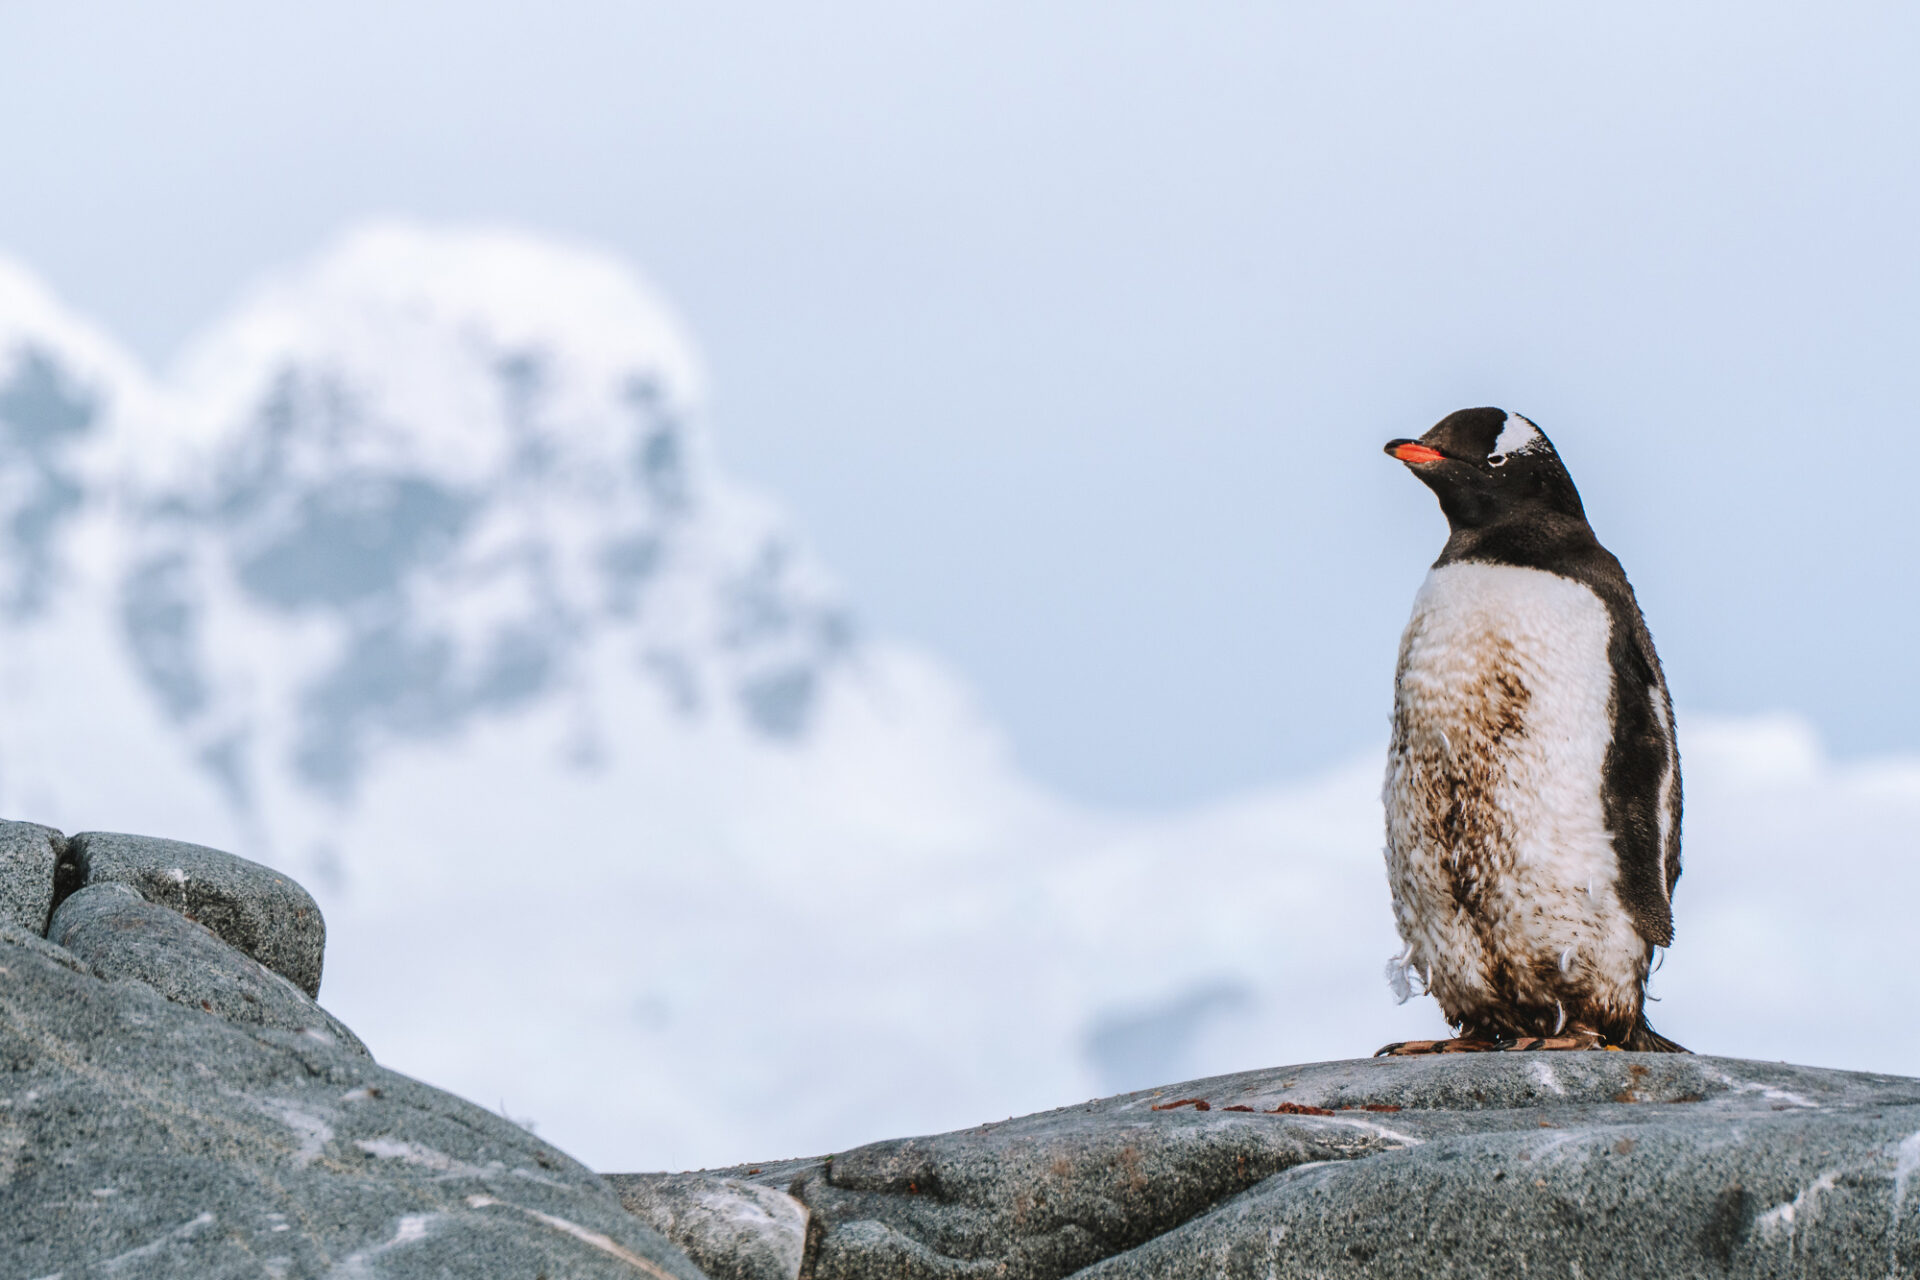 A baby penguin standing on a rock